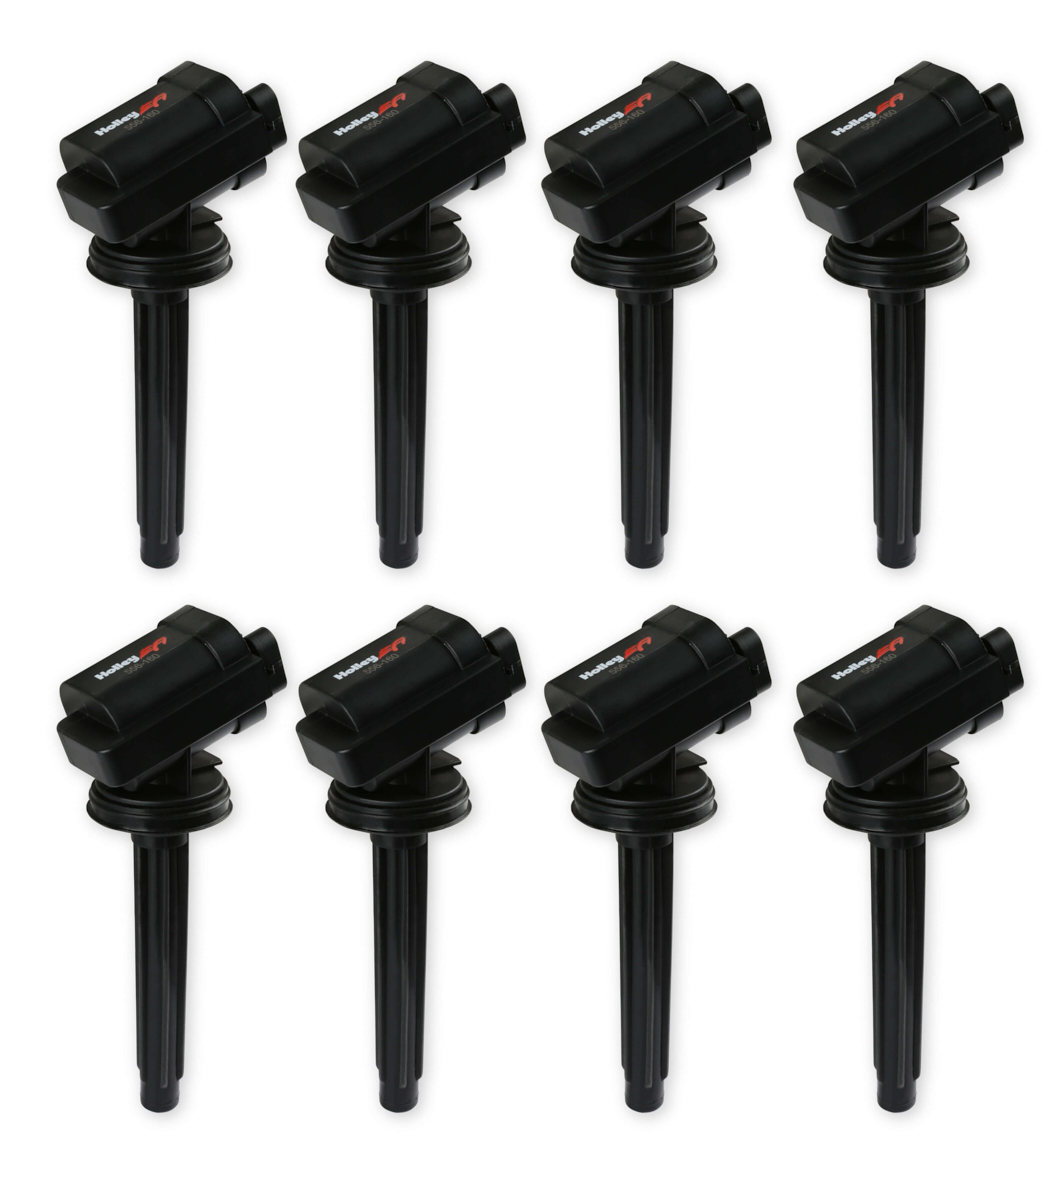 Holley 556-161 Ignition Coil Pack, Coil-On-Plug, Black, Ford Coyote, Set of 8